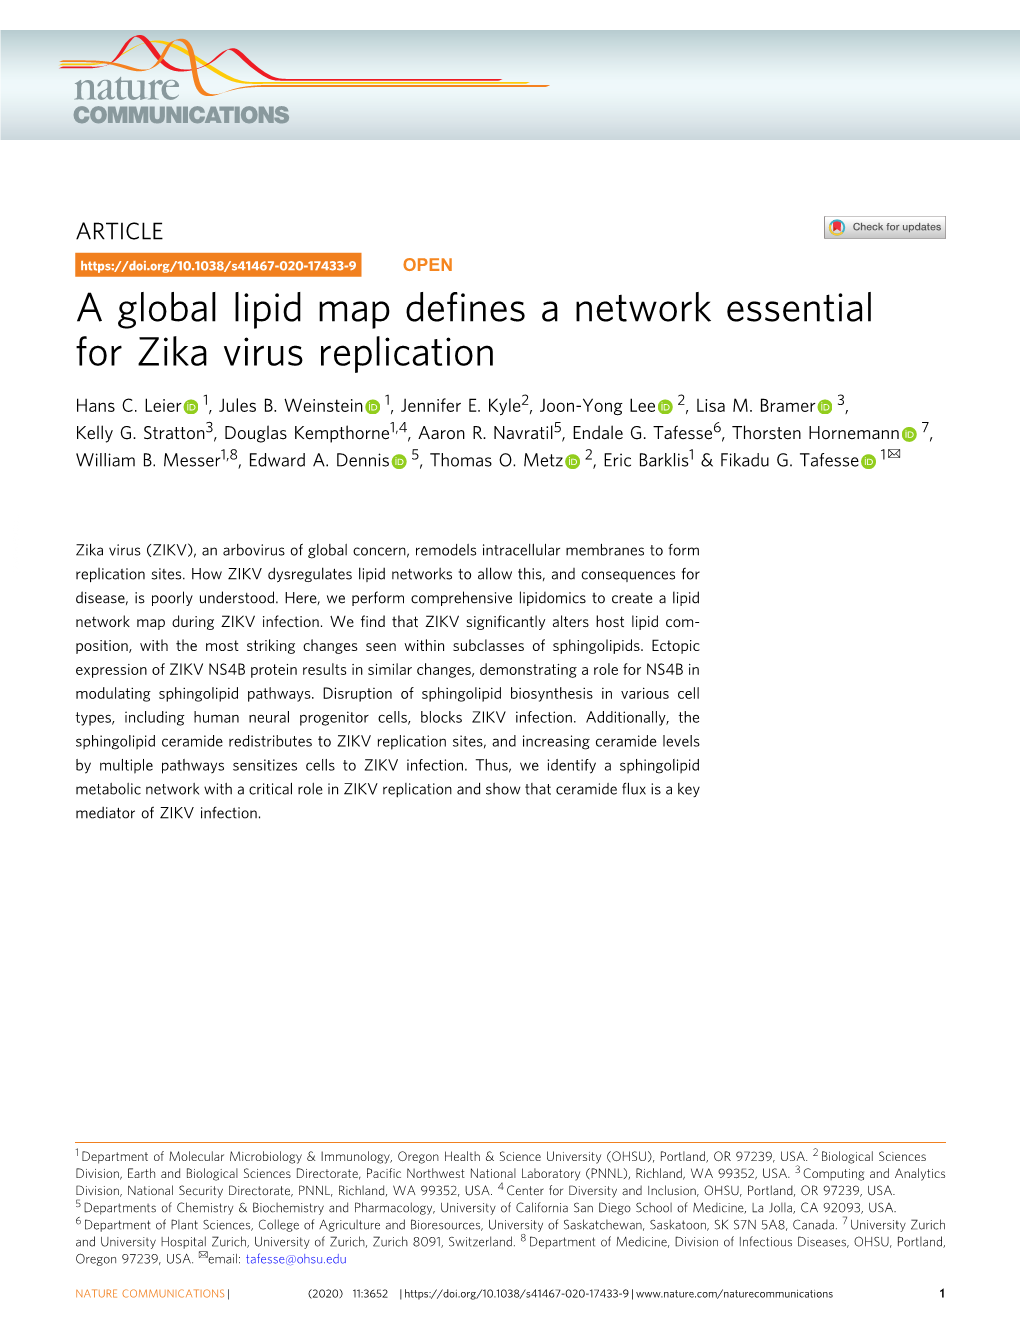 A Global Lipid Map Defines a Network Essential for Zika Virus Replication